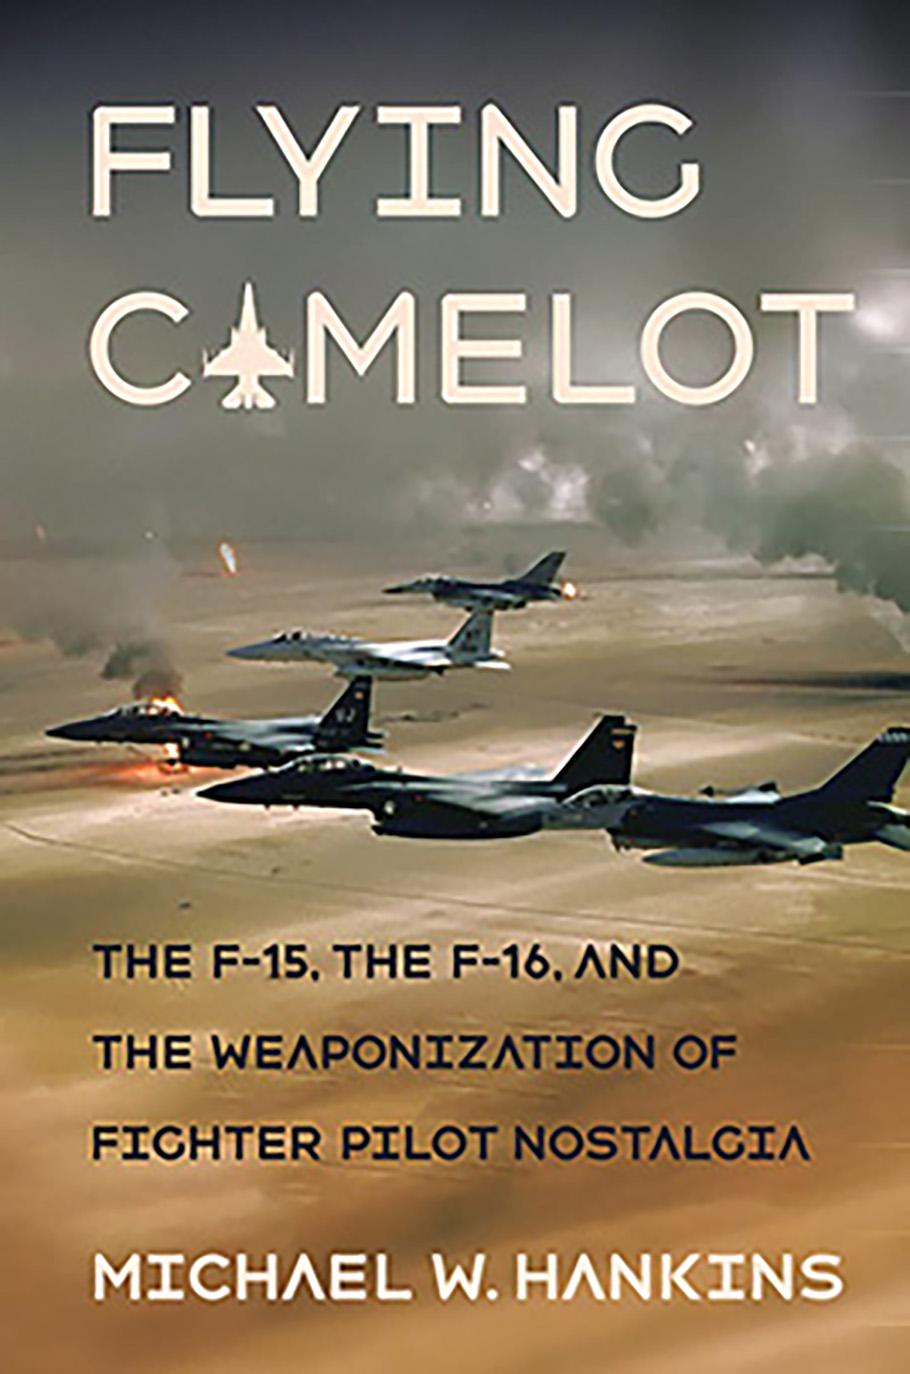 A book cover showing planes flying in a V. The text on the book cover reads "Flying Camelot. The F-15, the F-16, and the Weaponization of Fighter Pilot Nostalgia."